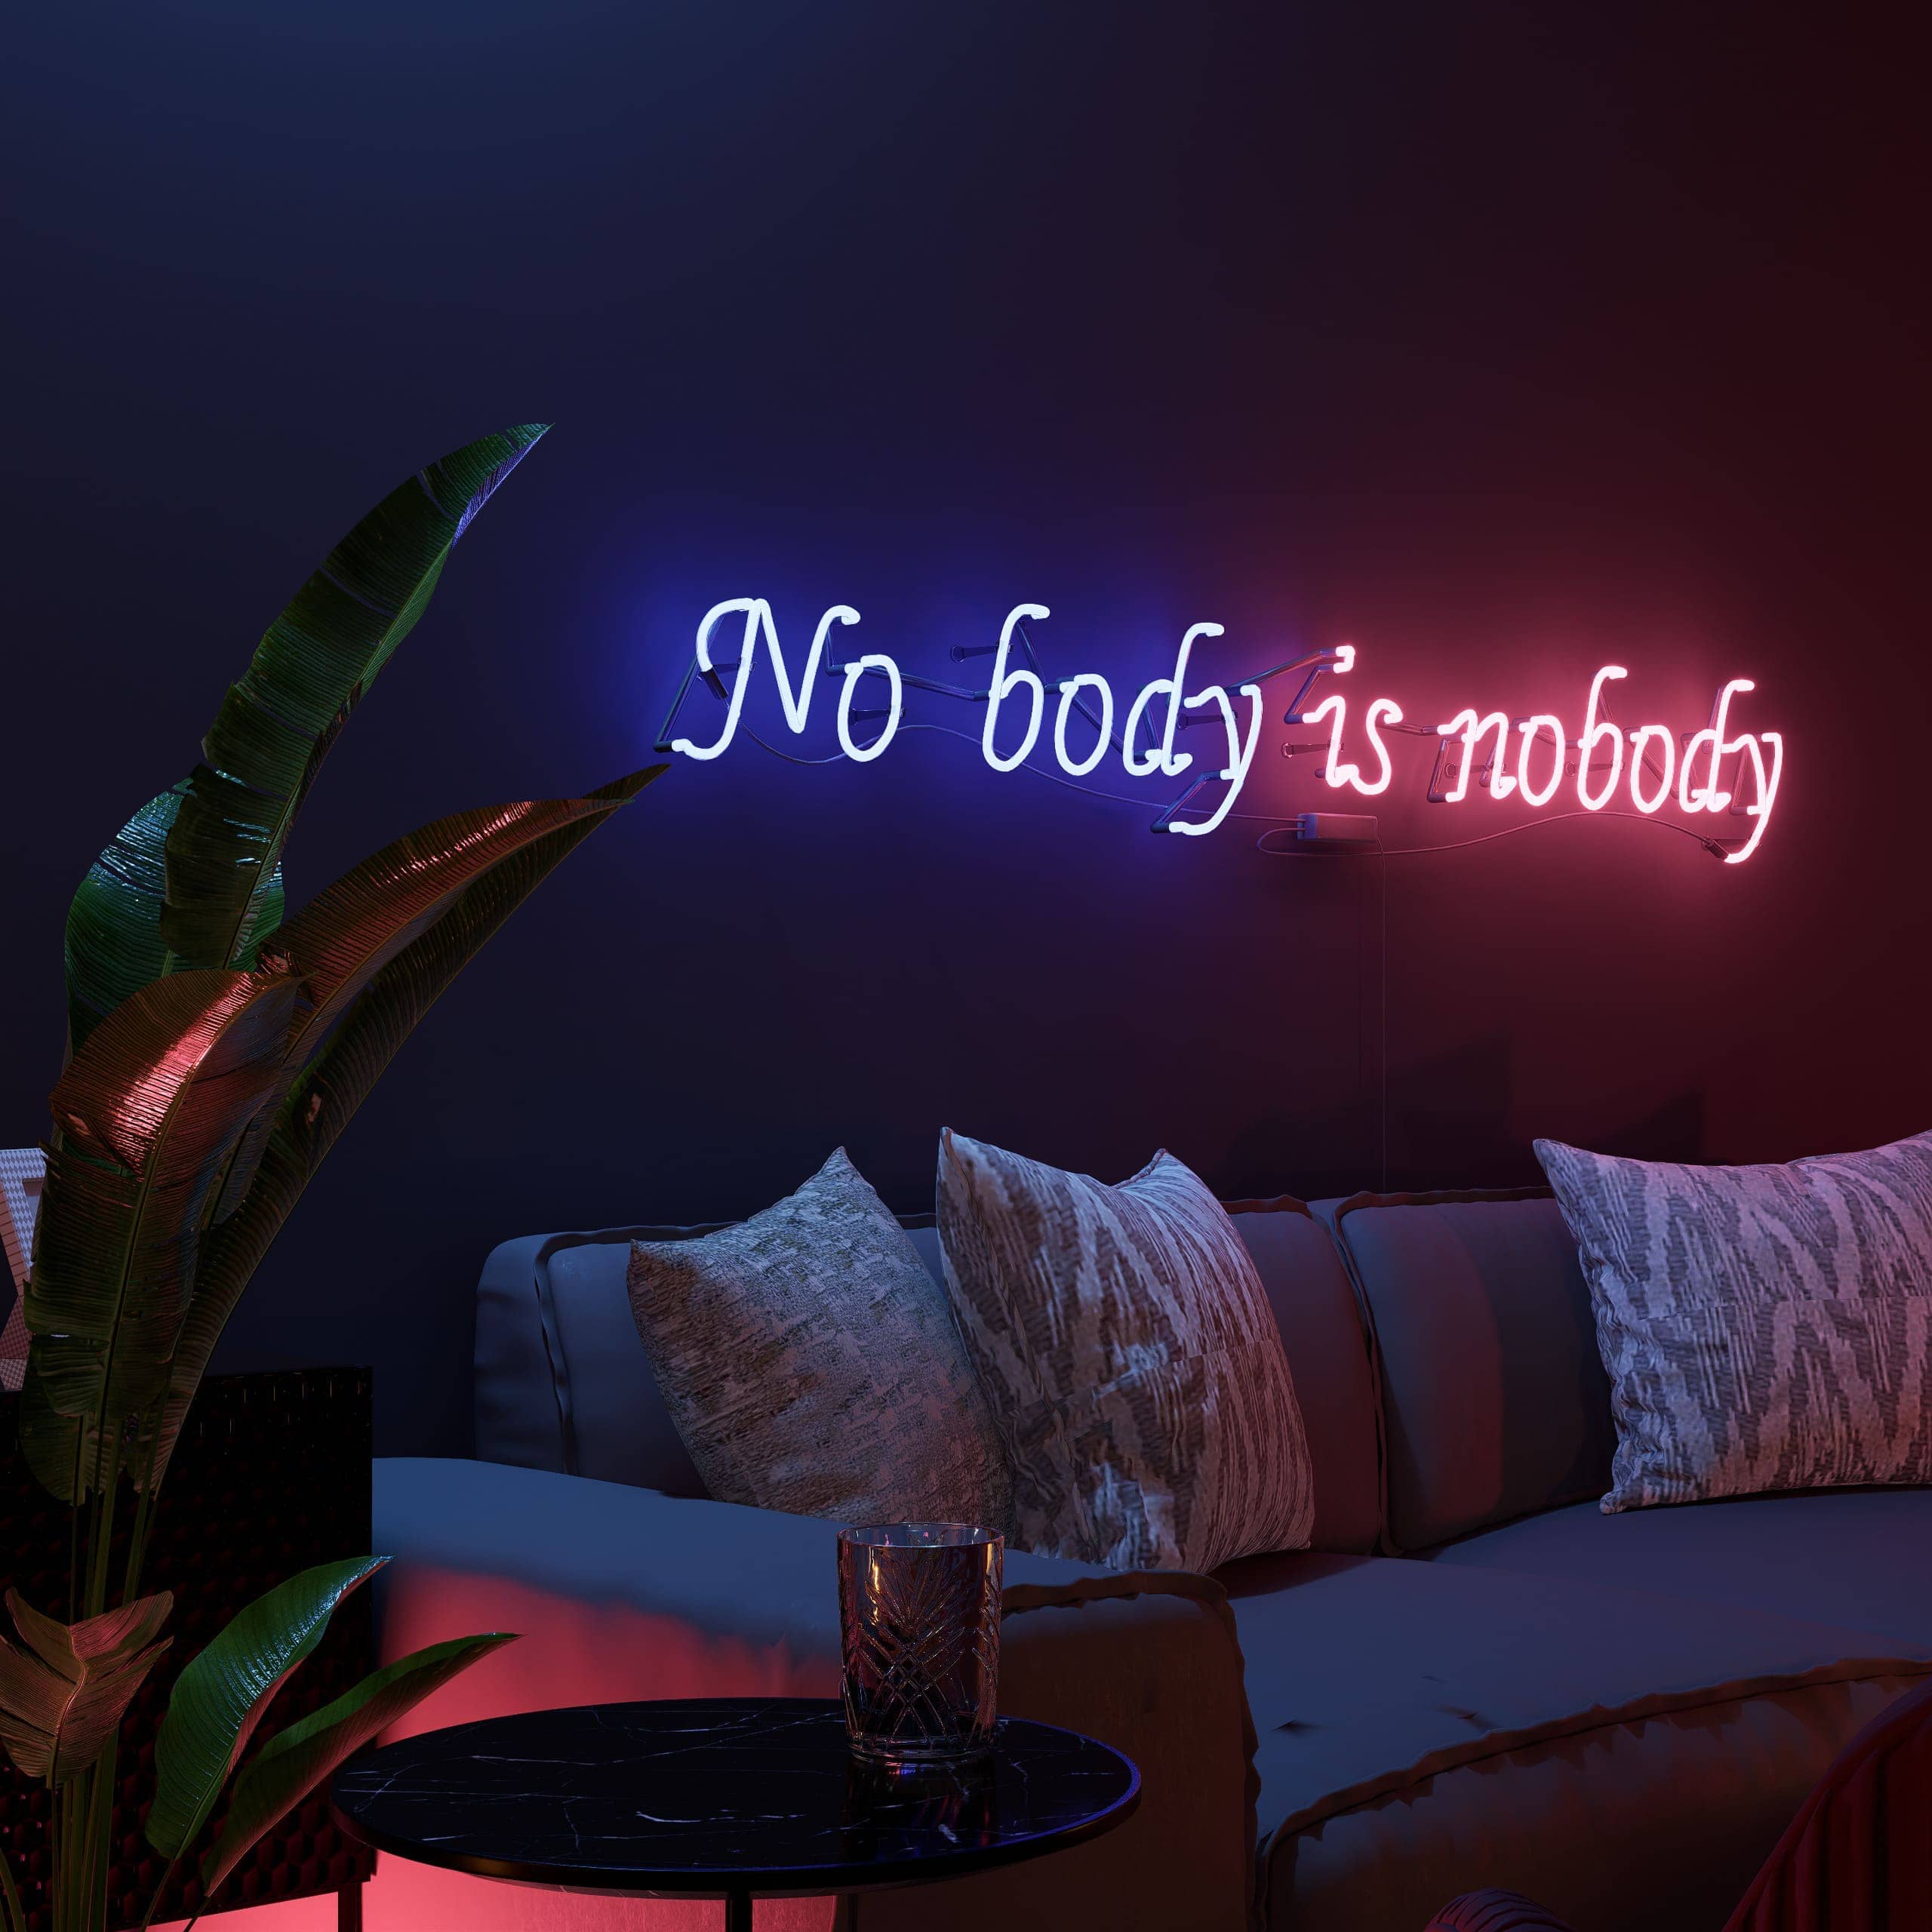 vintage-neon-signs-inspire-with-'no-body-is-nobody'